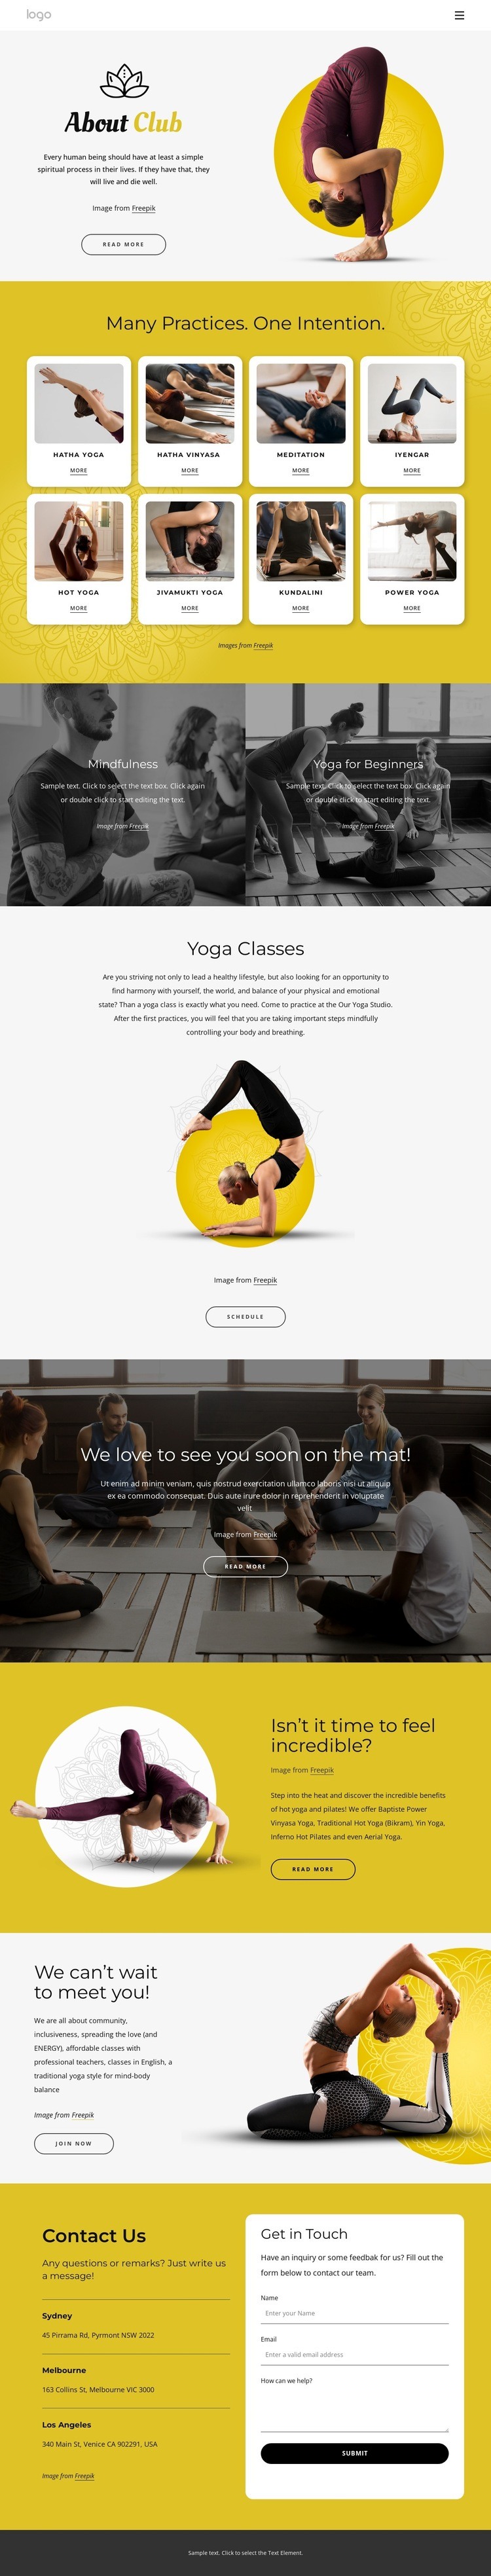 Physical, ethical and spiritual practice Homepage Design